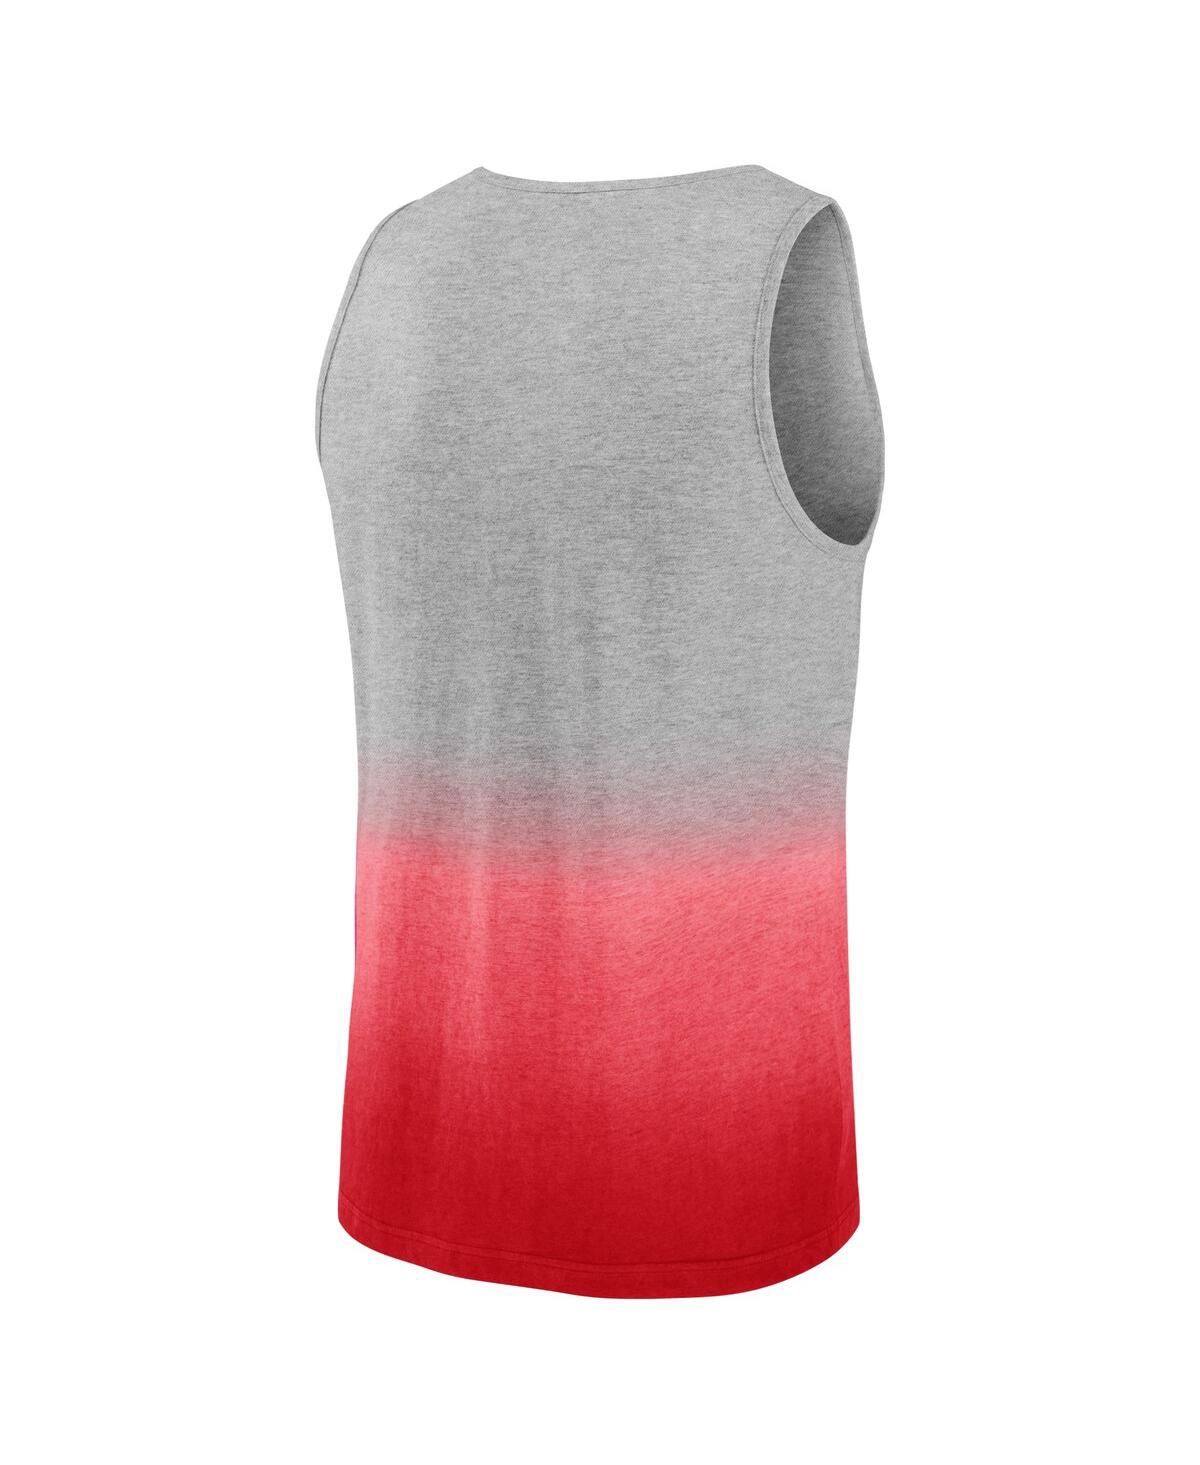 Shop Fanatics Men's  Gray, Red St. Louis Cardinals Our Year Tank Top In Gray,red